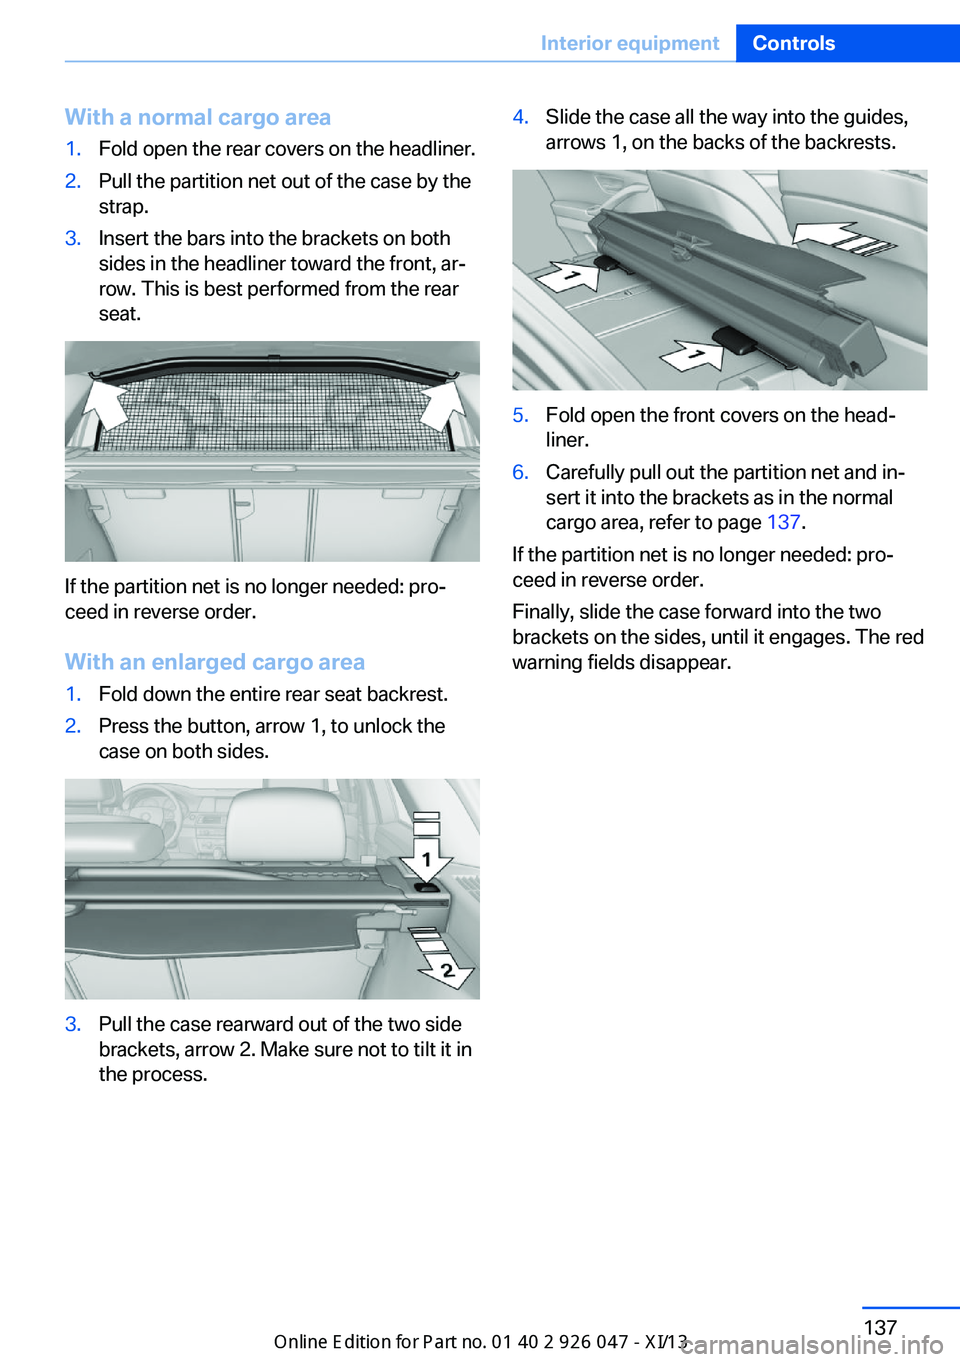 BMW X3 2013 F25 Owners Manual With a normal cargo area1.Fold open the rear covers on the headliner.2.Pull the partition net out of the case by the
strap.3.Insert the bars into the brackets on both
sides in the headliner toward the